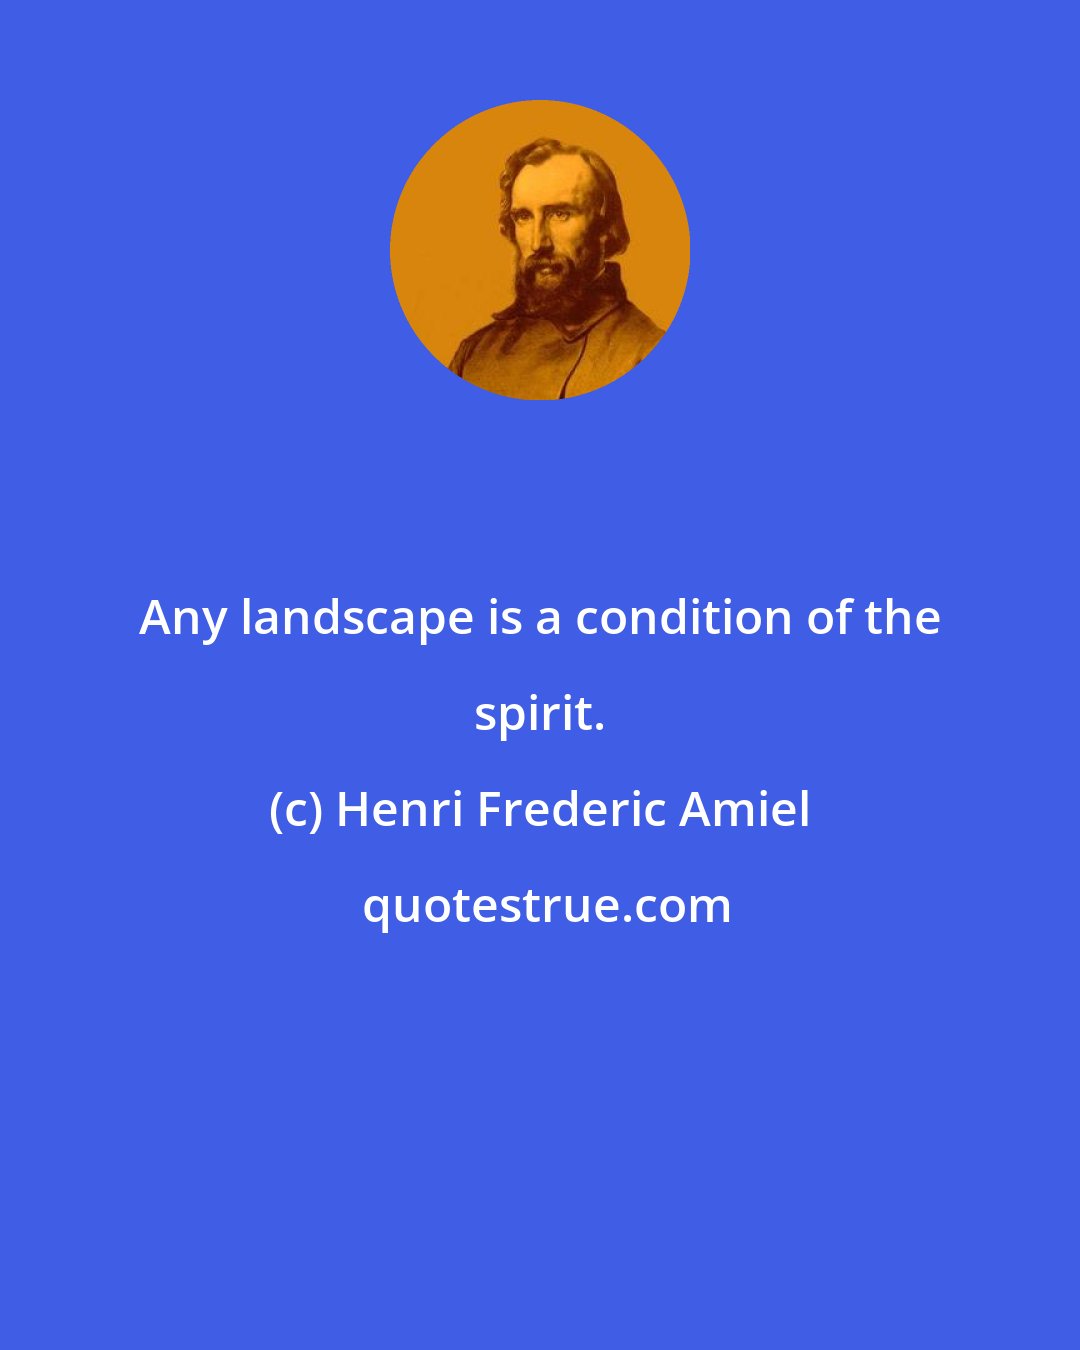 Henri Frederic Amiel: Any landscape is a condition of the spirit.